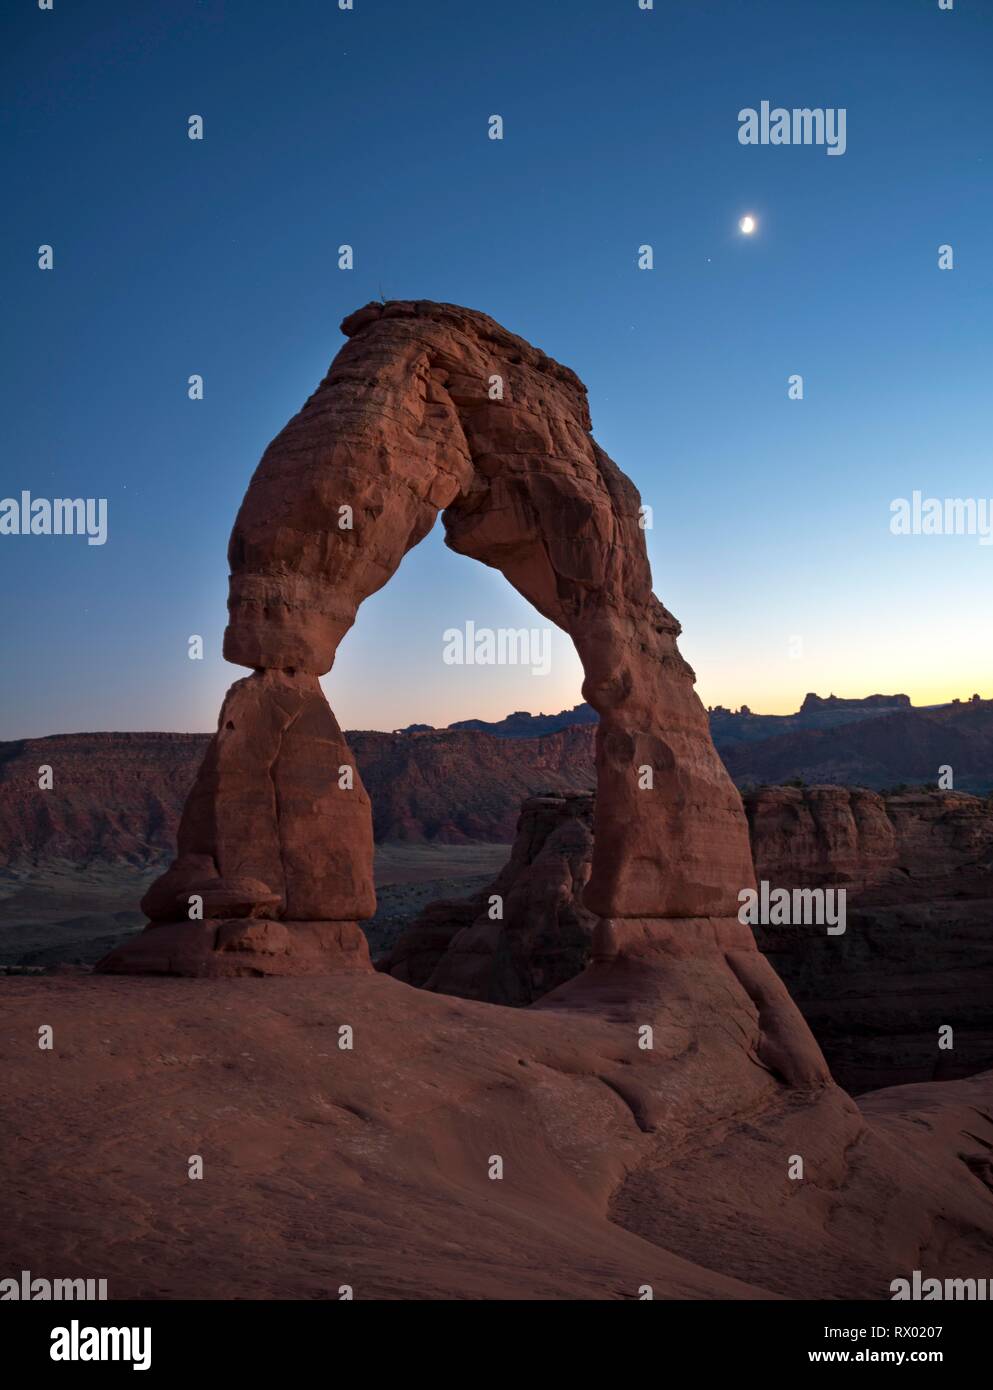 Delicate Arch rock arch Evening sky with moon, Arches National Park, Moab, Utah, USA Stock Photo